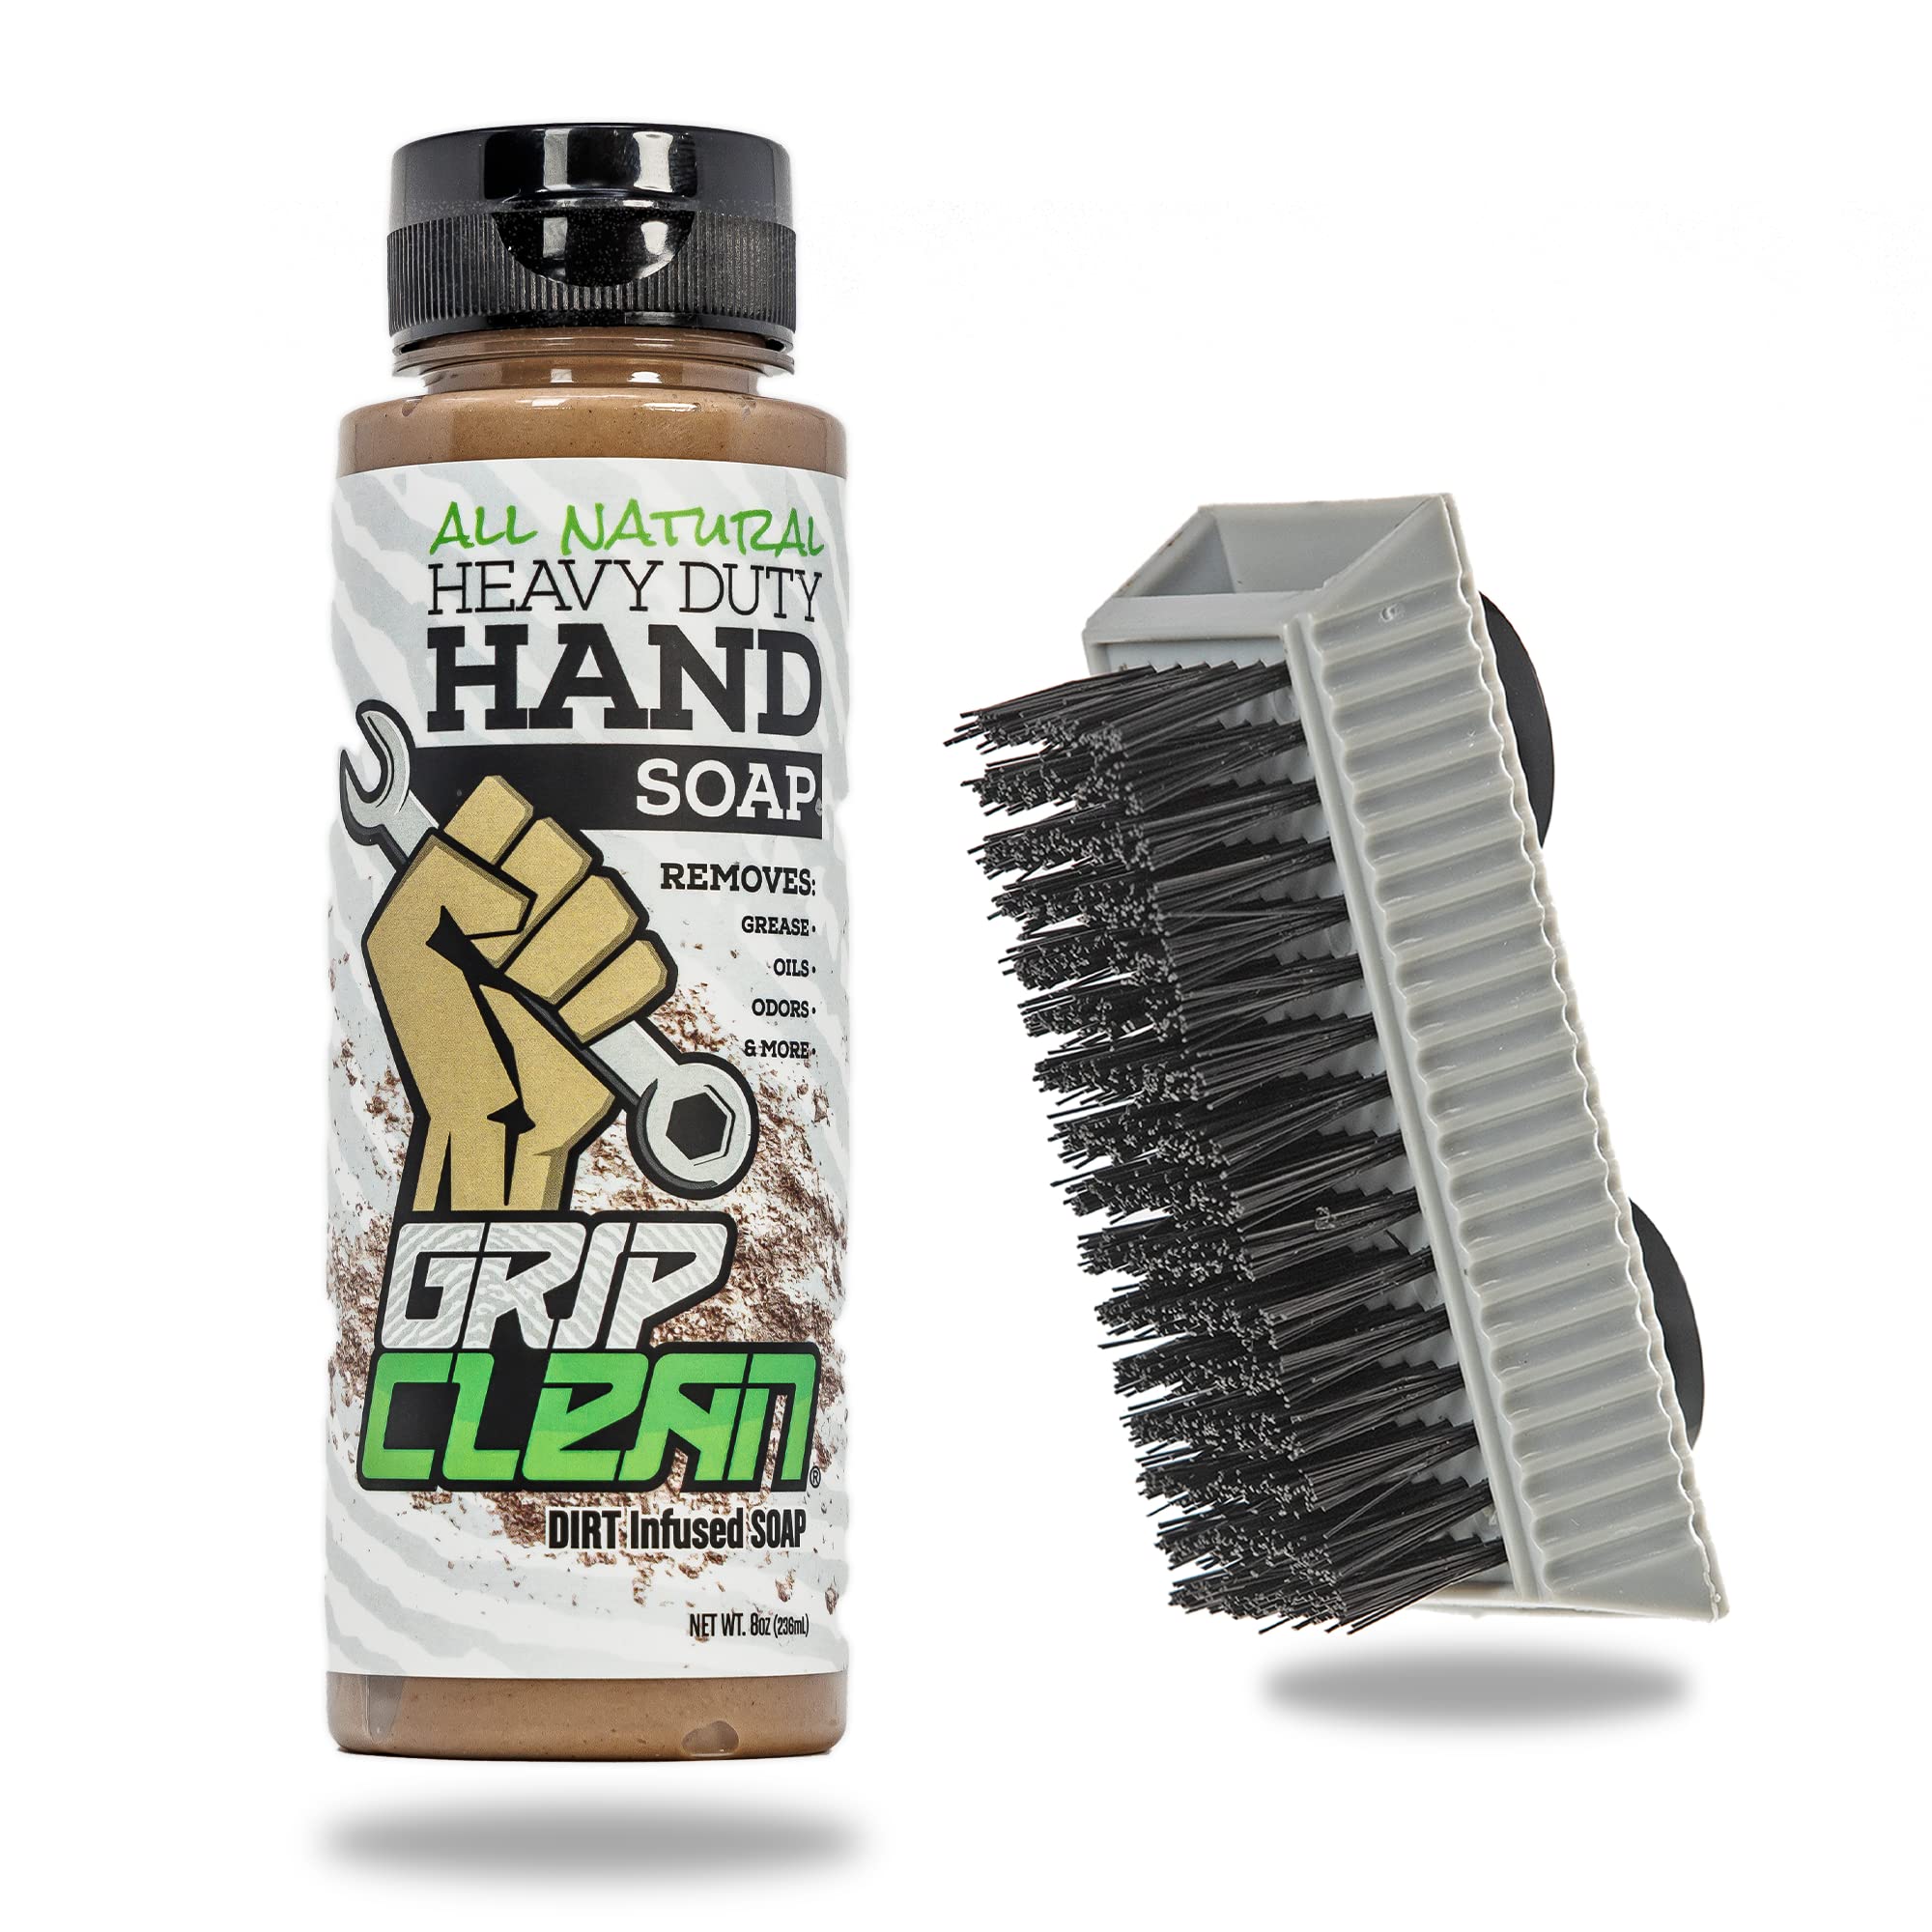 Grip Clean  Hand Cleaner for Auto Mechanics - Heavy Duty Pumice